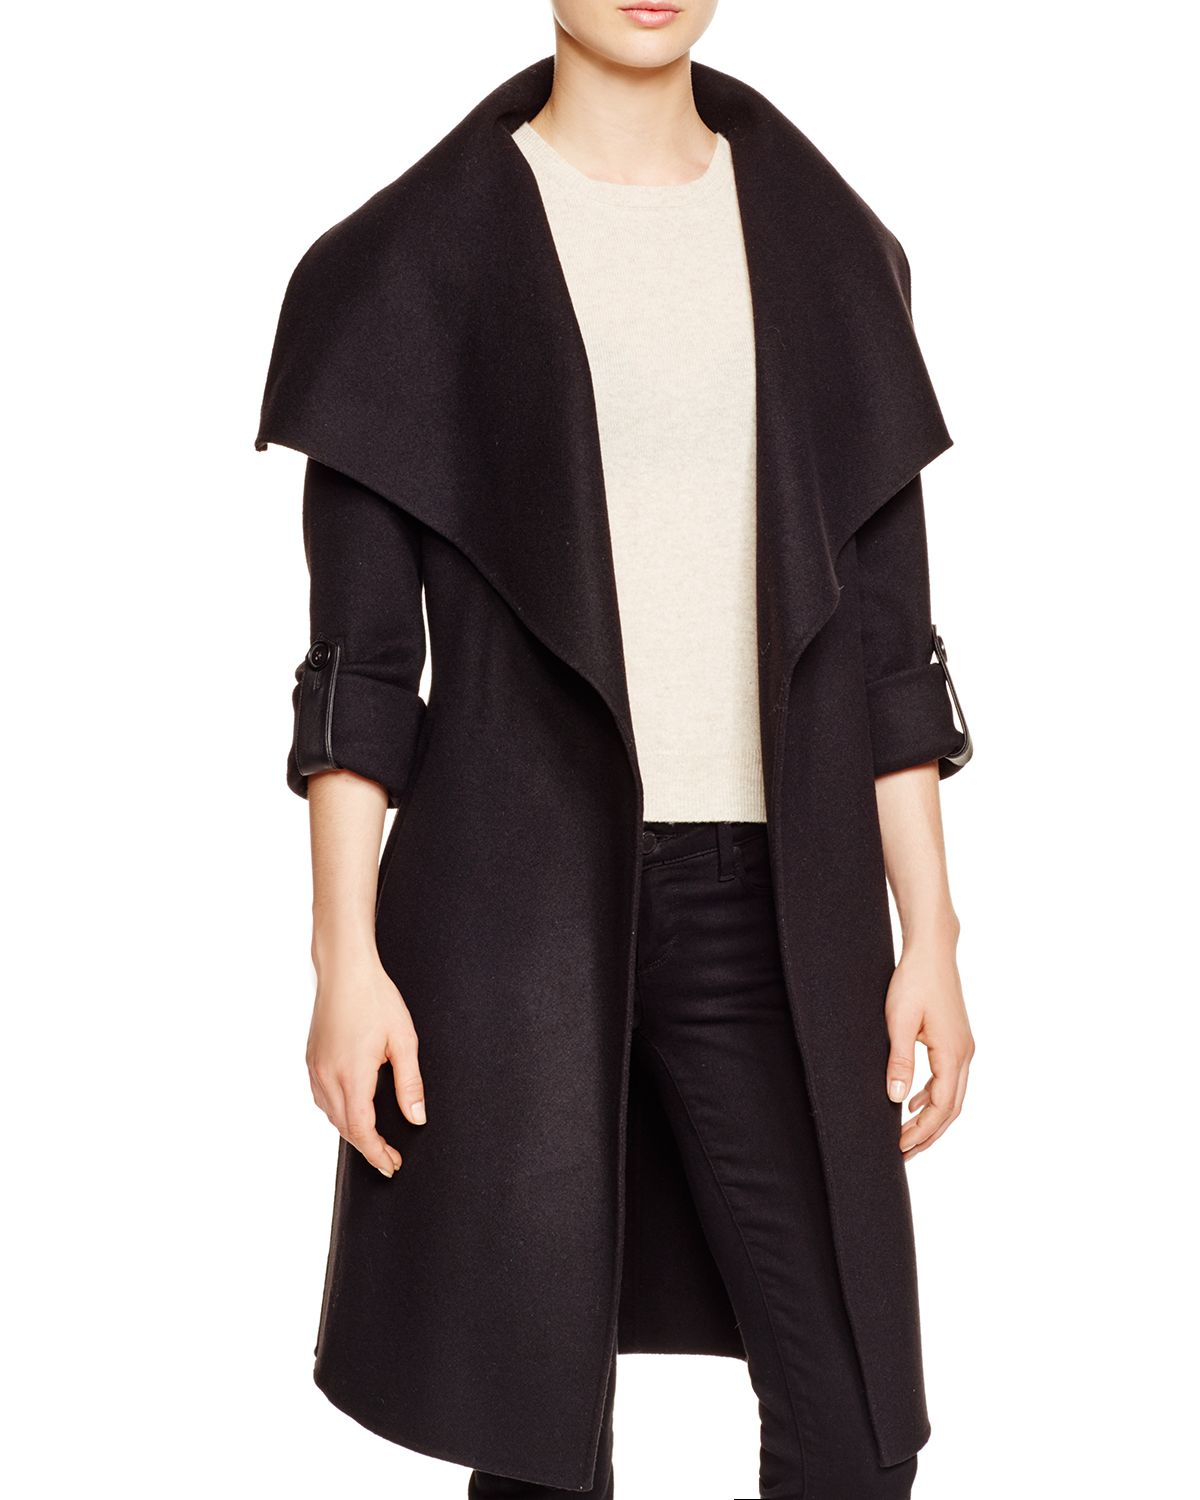 Mackage Brin Wrap Coat With Leather Trim - Bloomingdale'S Exclusive in ...